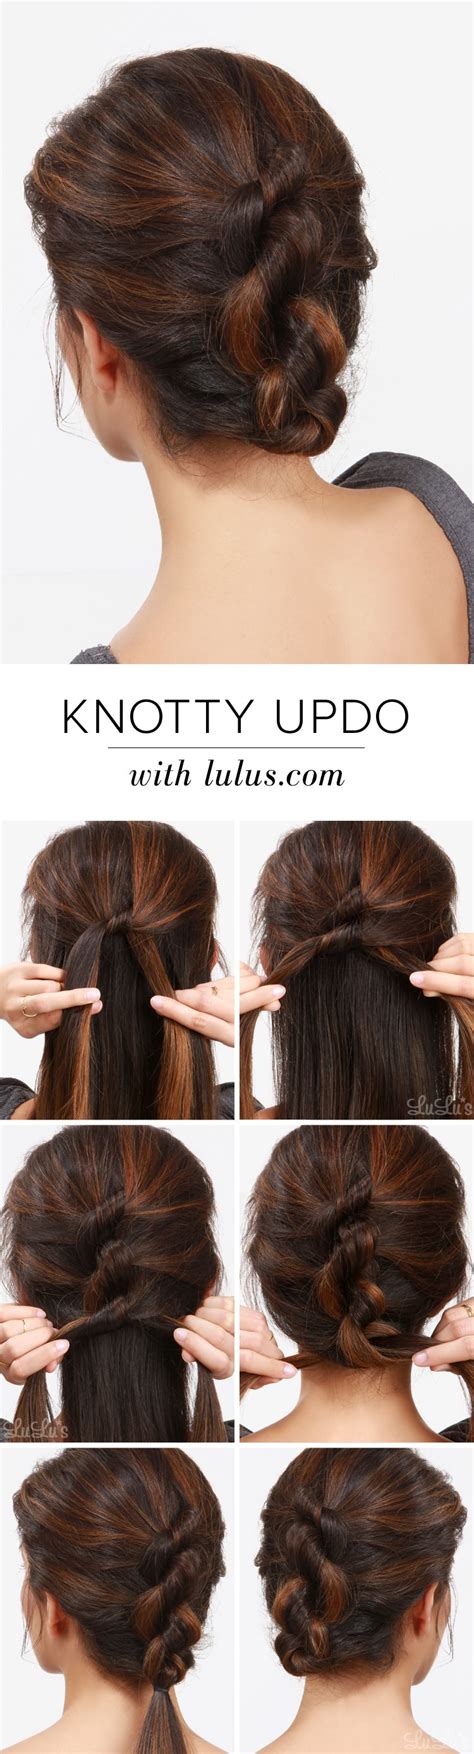 This hairstyle is super easy to achieve. 20 Easy Hairstyle Tutorials for Your Everyday Look ...